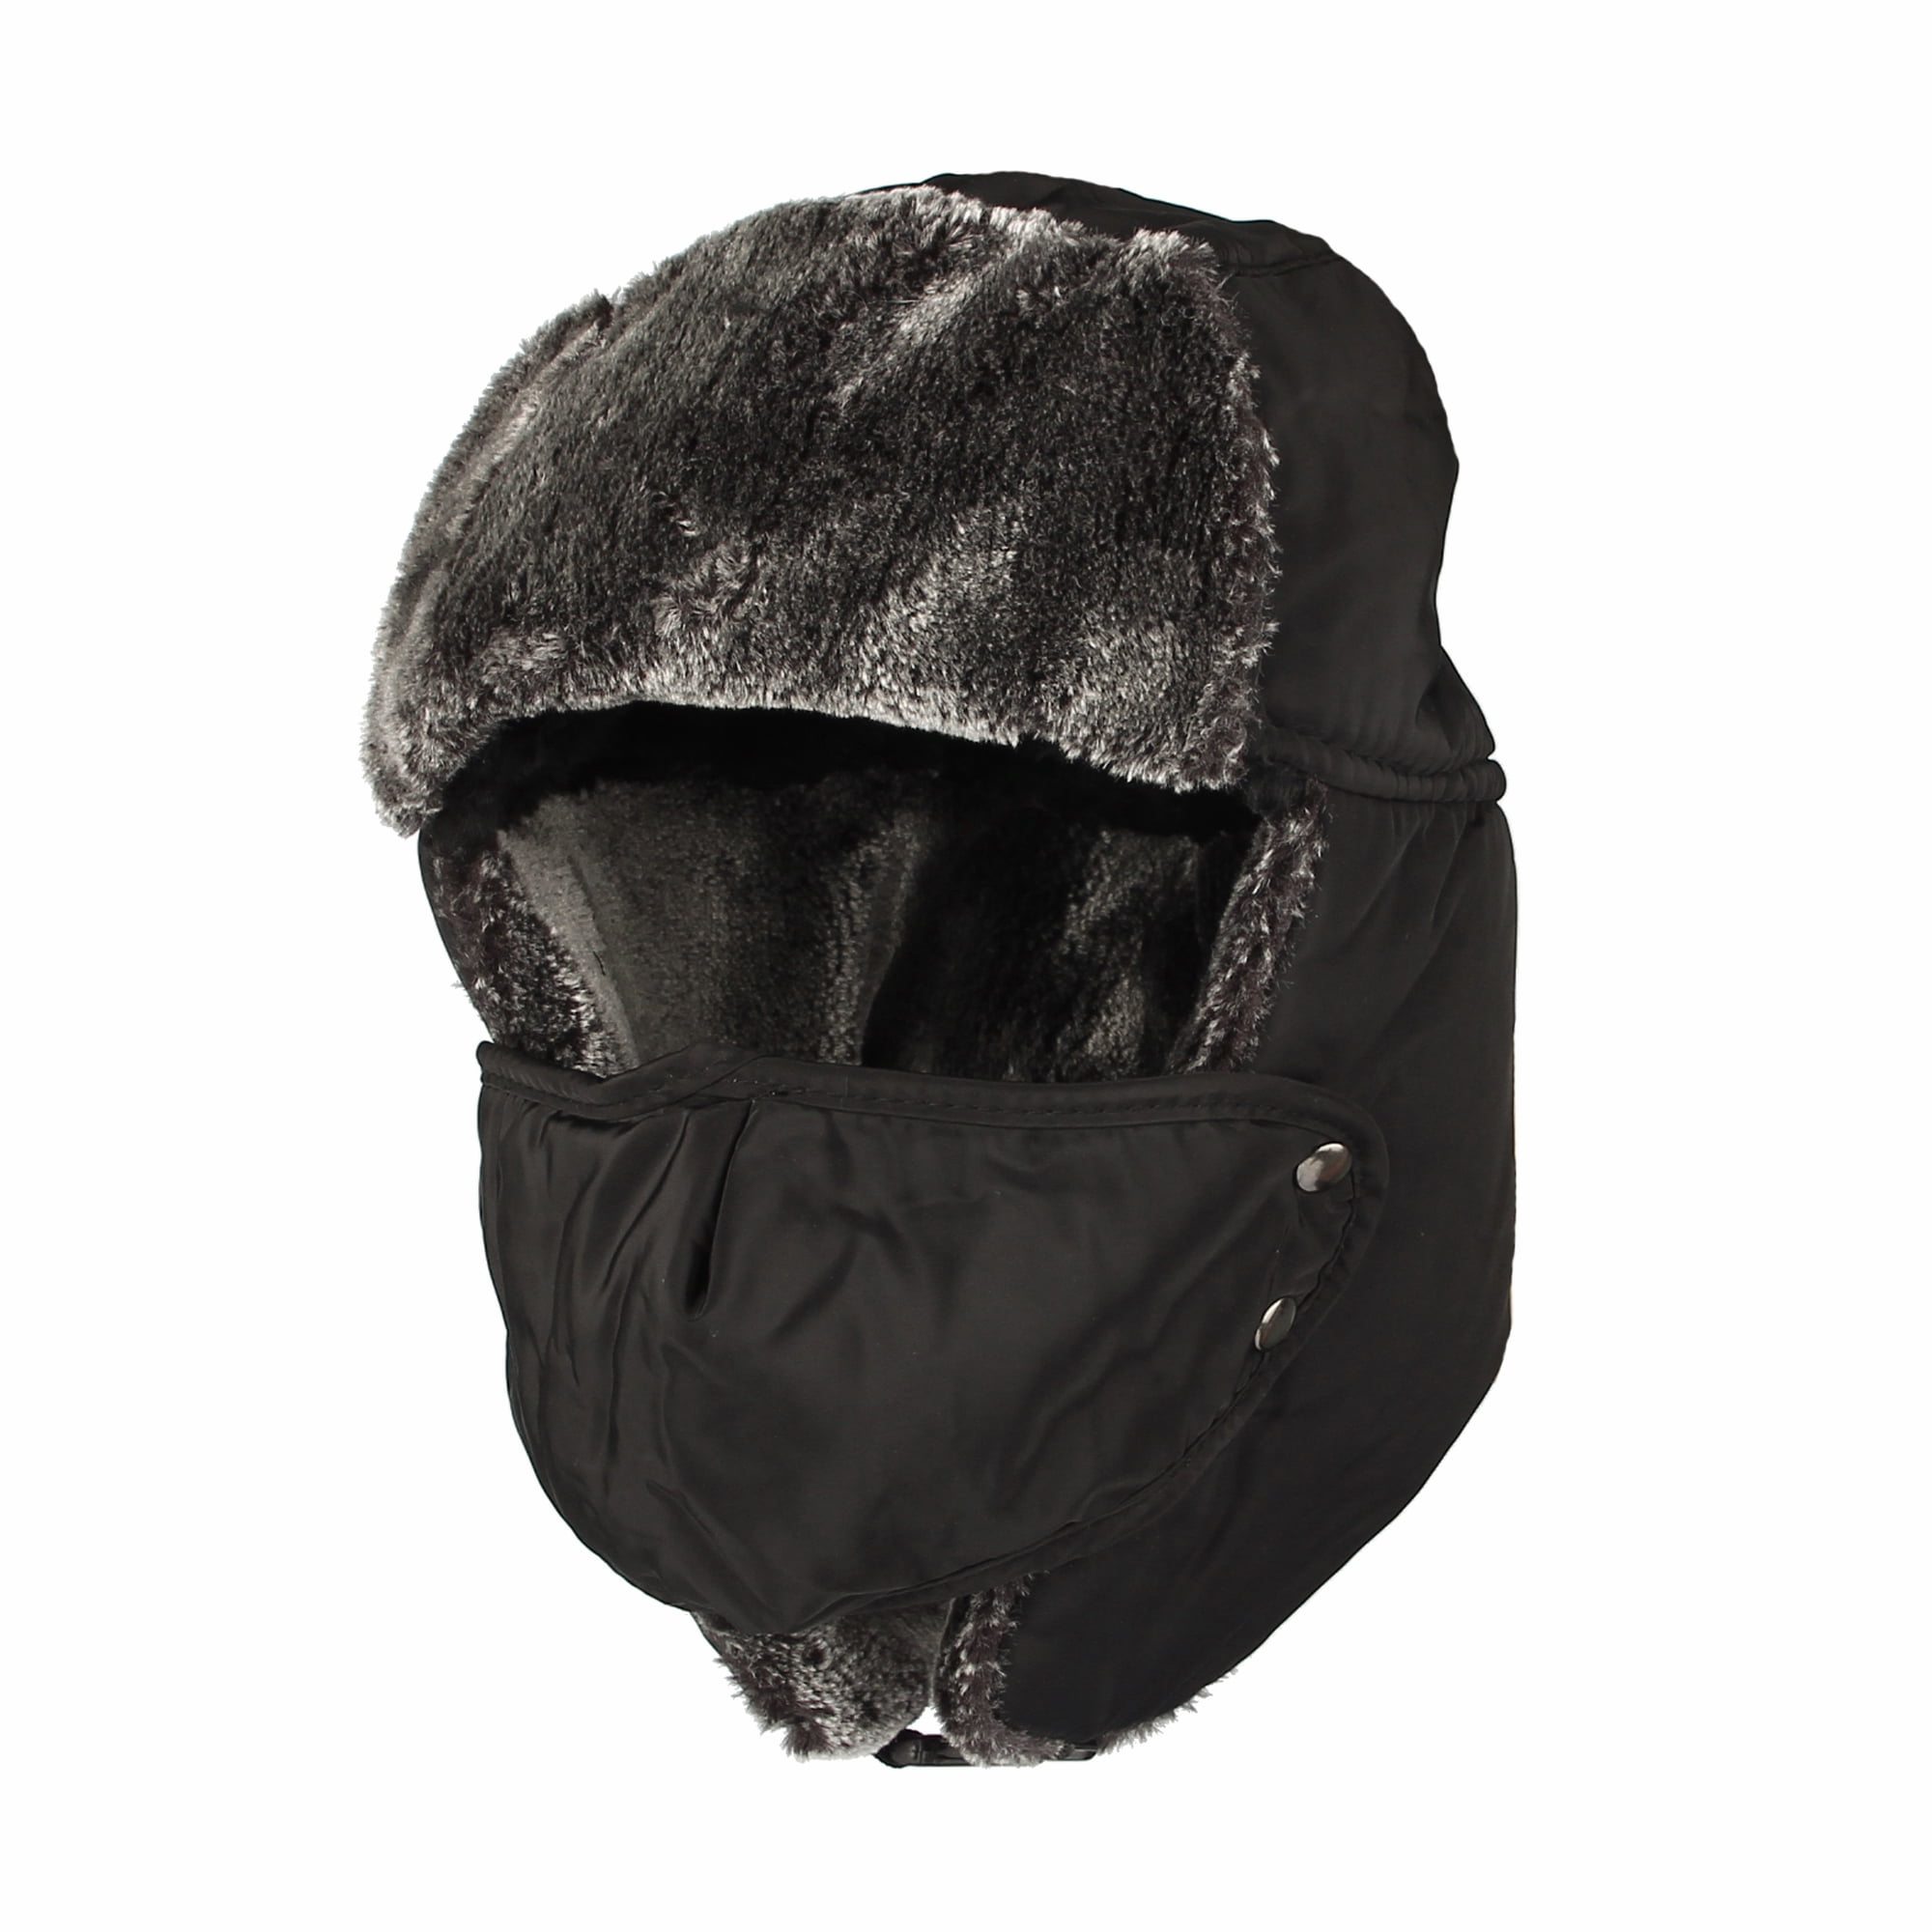 WITHMOONS Winter Trapper Russian Hat Earflaps Windproof Cap AZT0016 ...